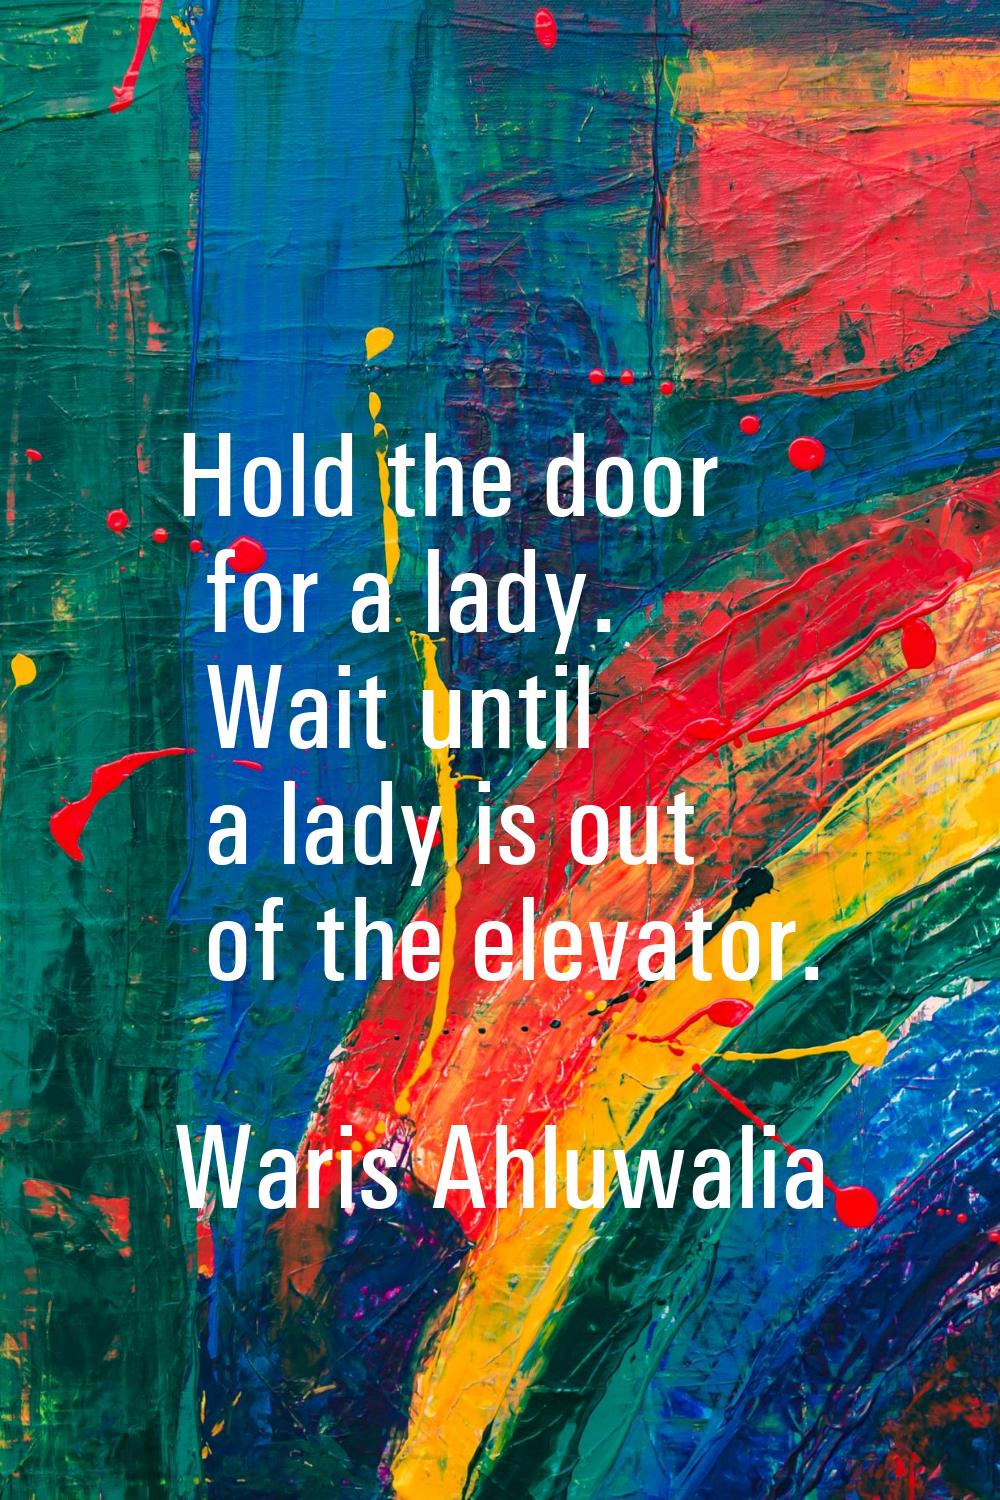 Hold the door for a lady. Wait until a lady is out of the elevator.